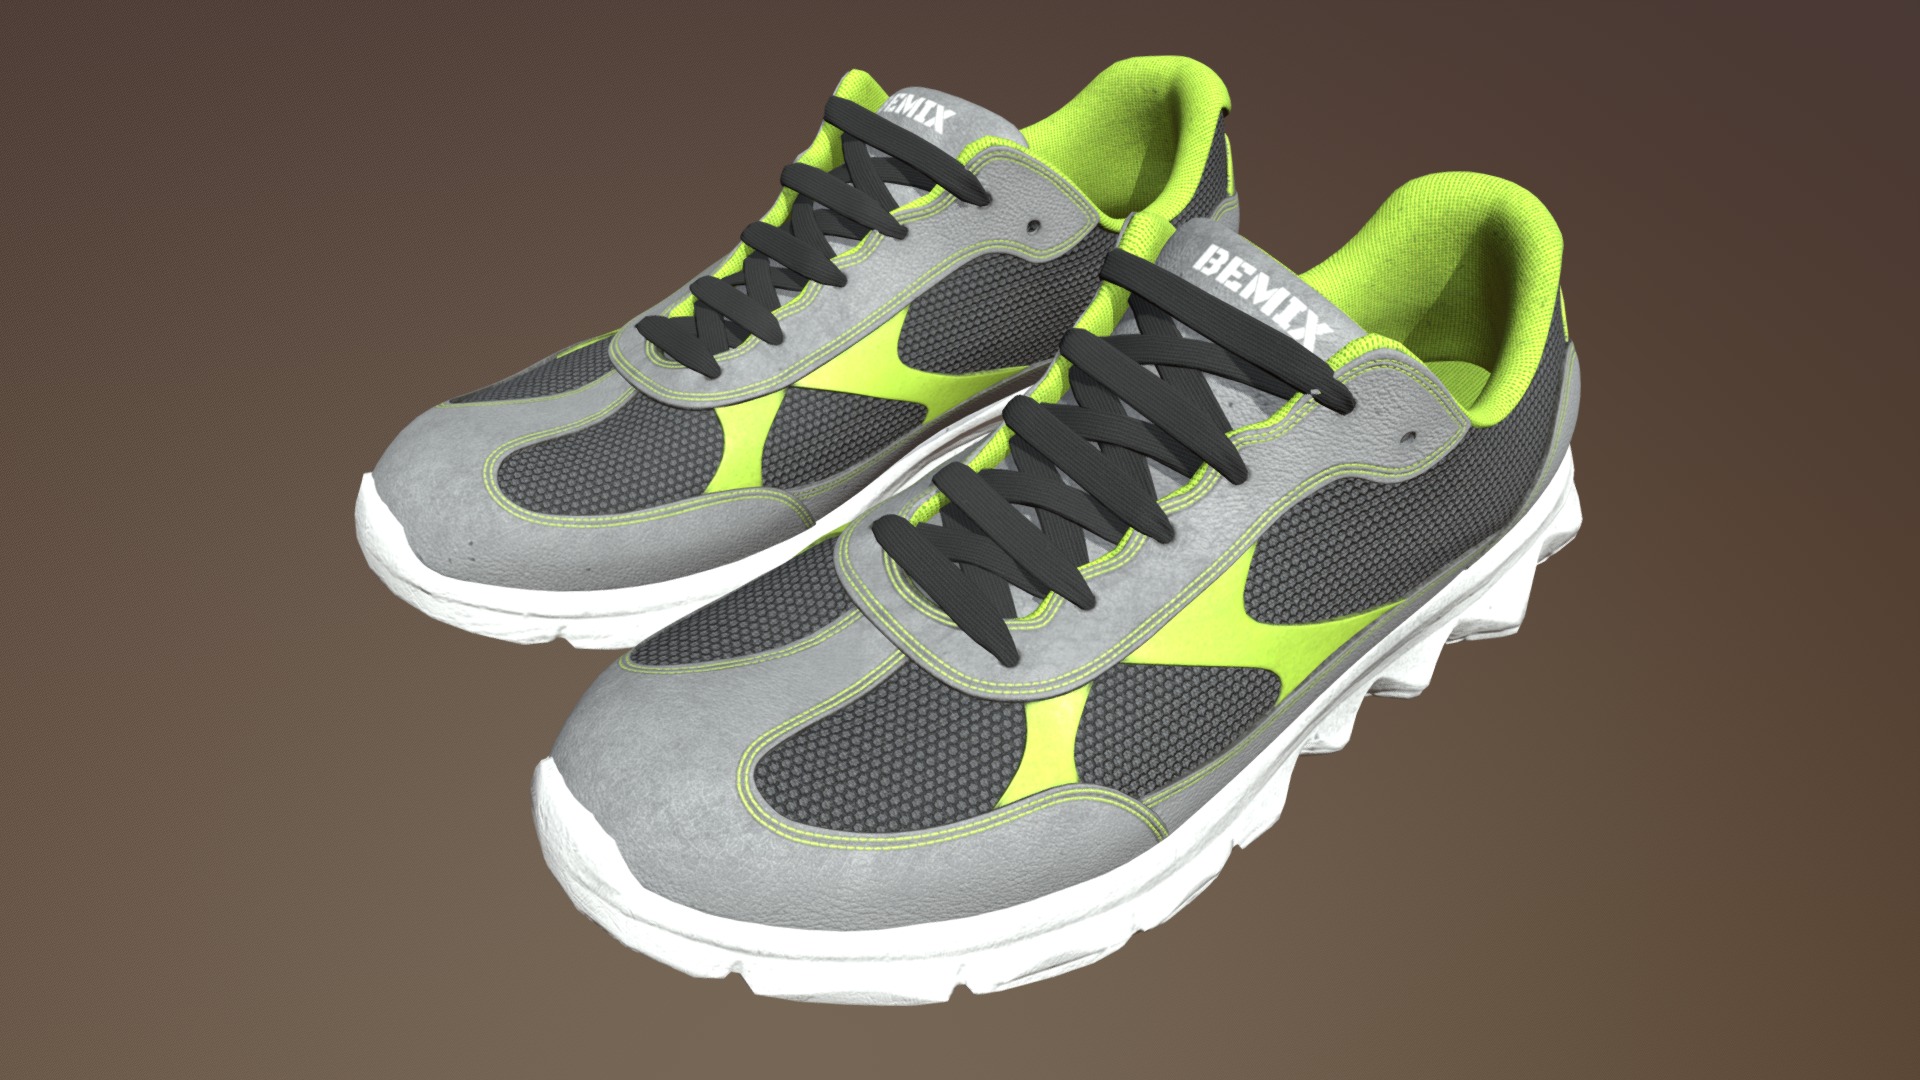 3D model Sneakers - This is a 3D model of the Sneakers. The 3D model is about a pair of green and black tennis shoes.